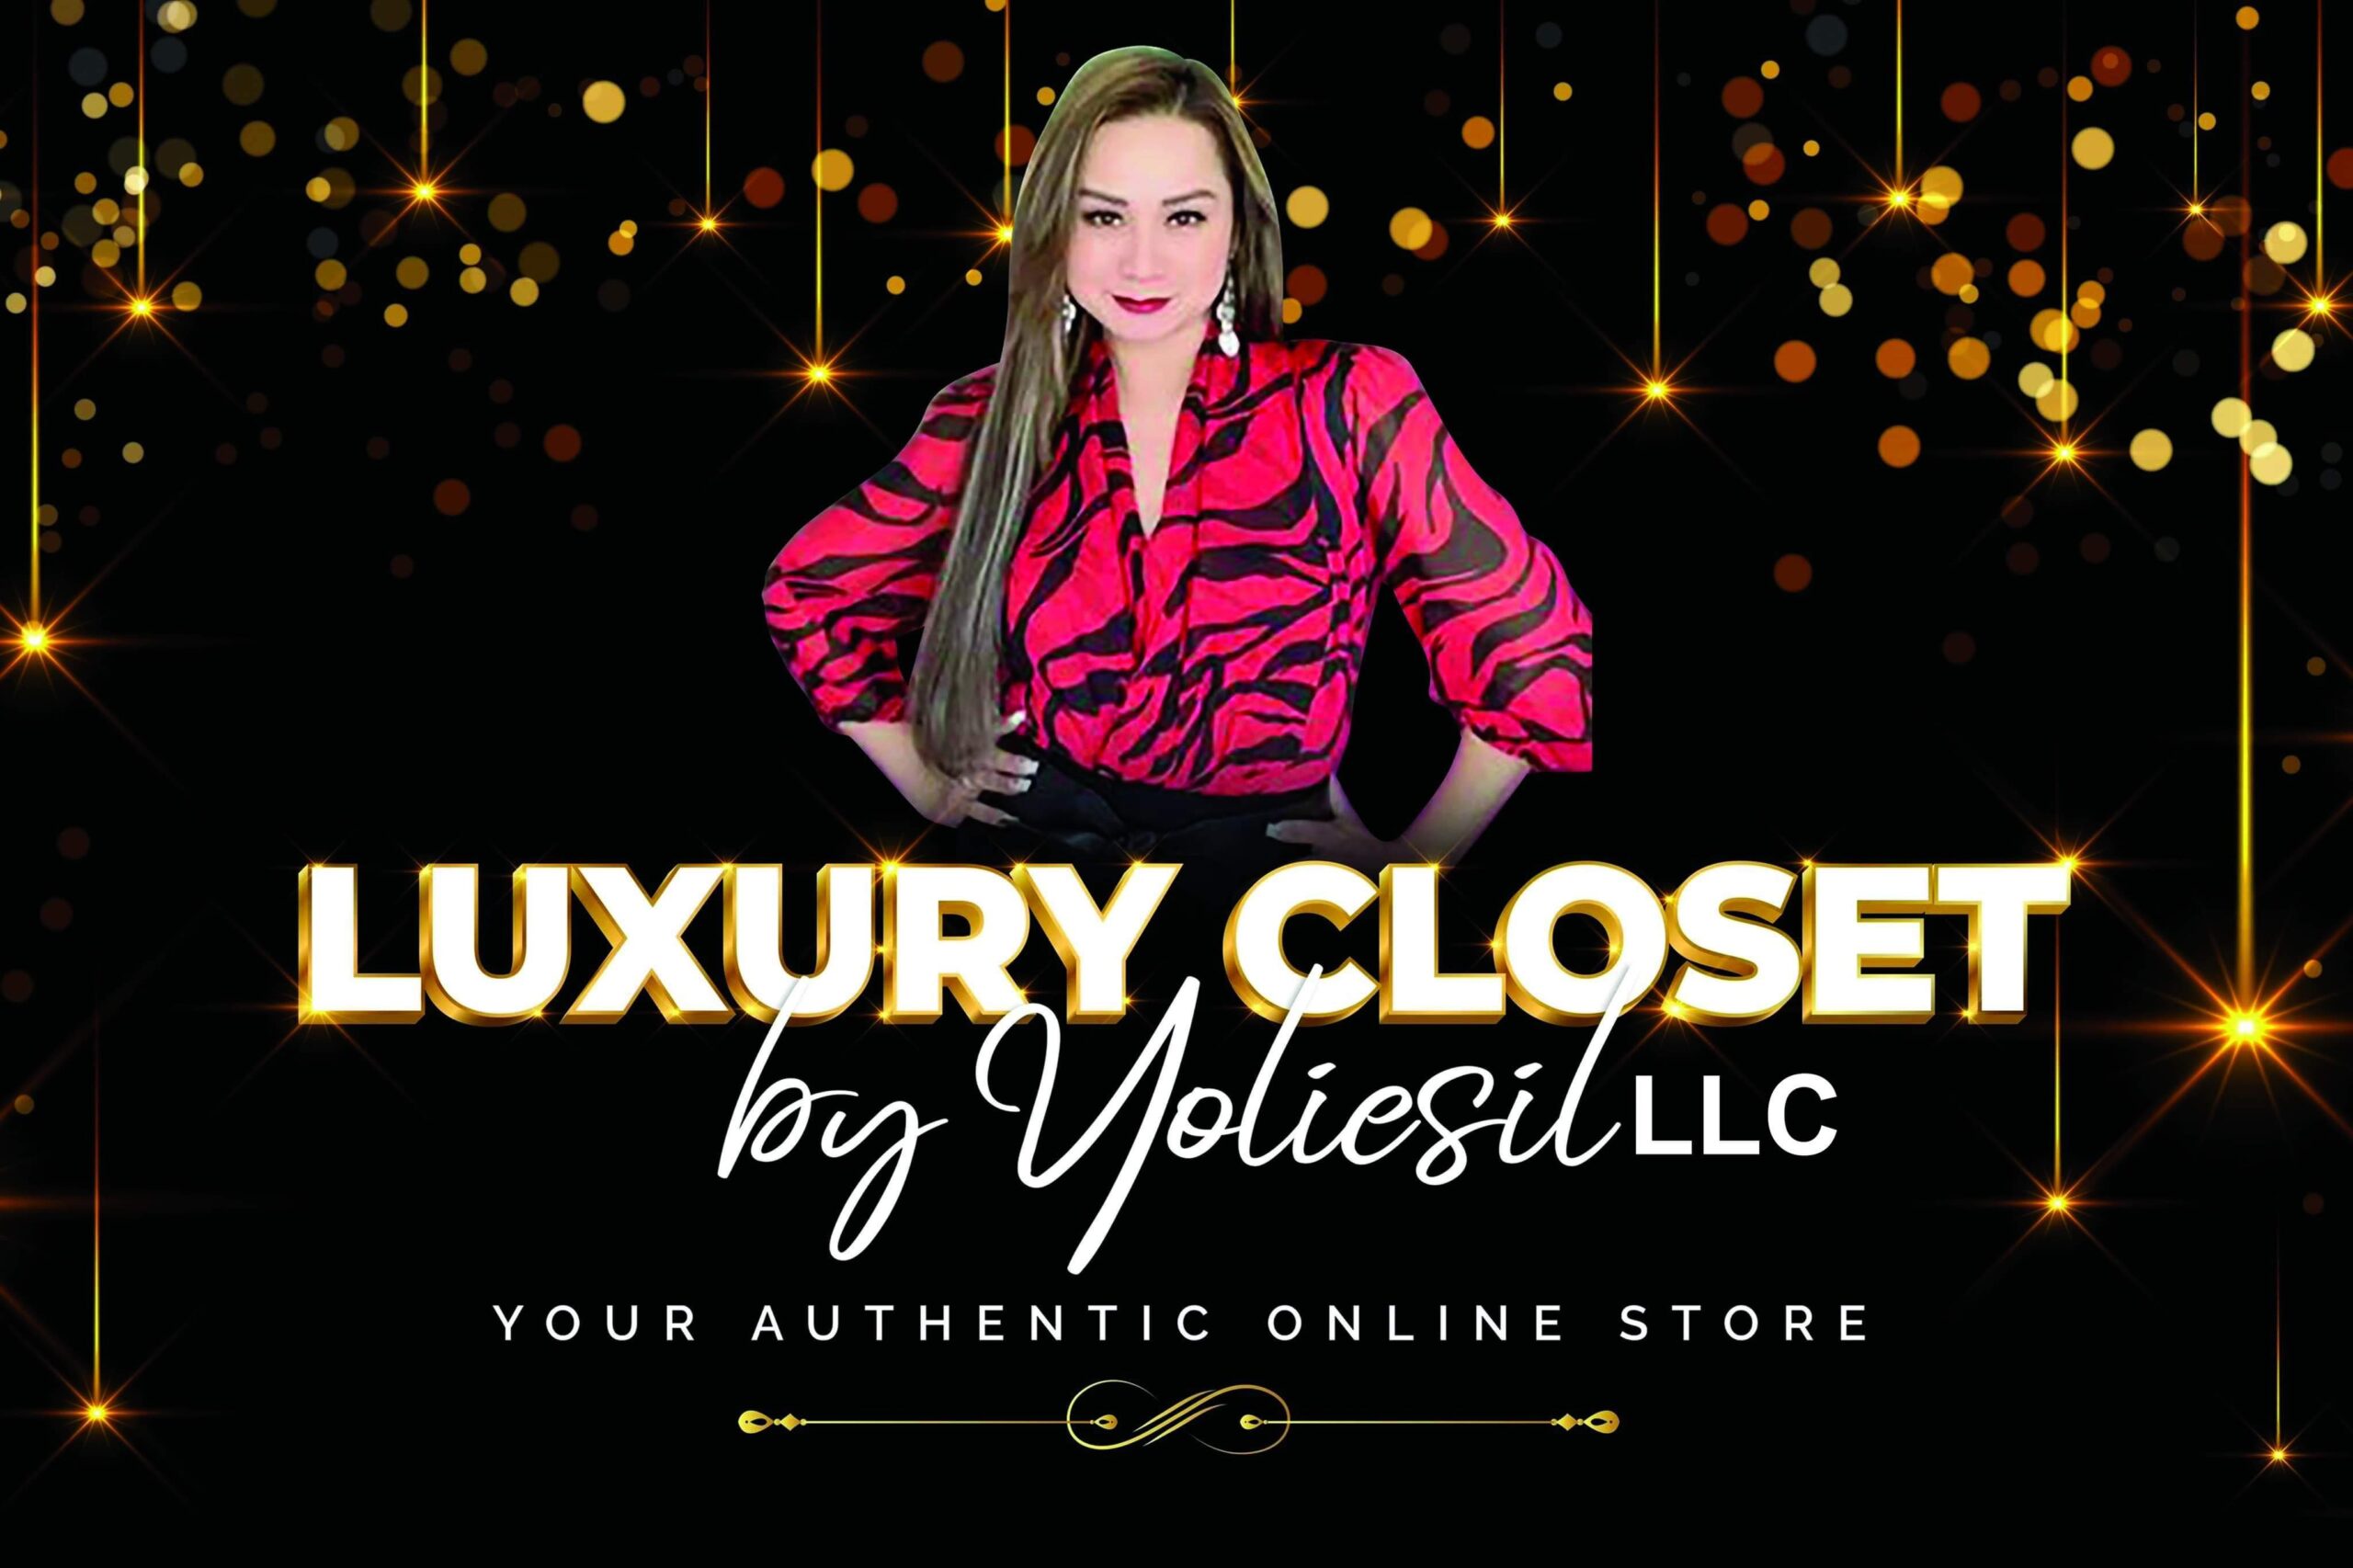 Luxury Closet By Yoliesil LLC – Your Authentic Online Store